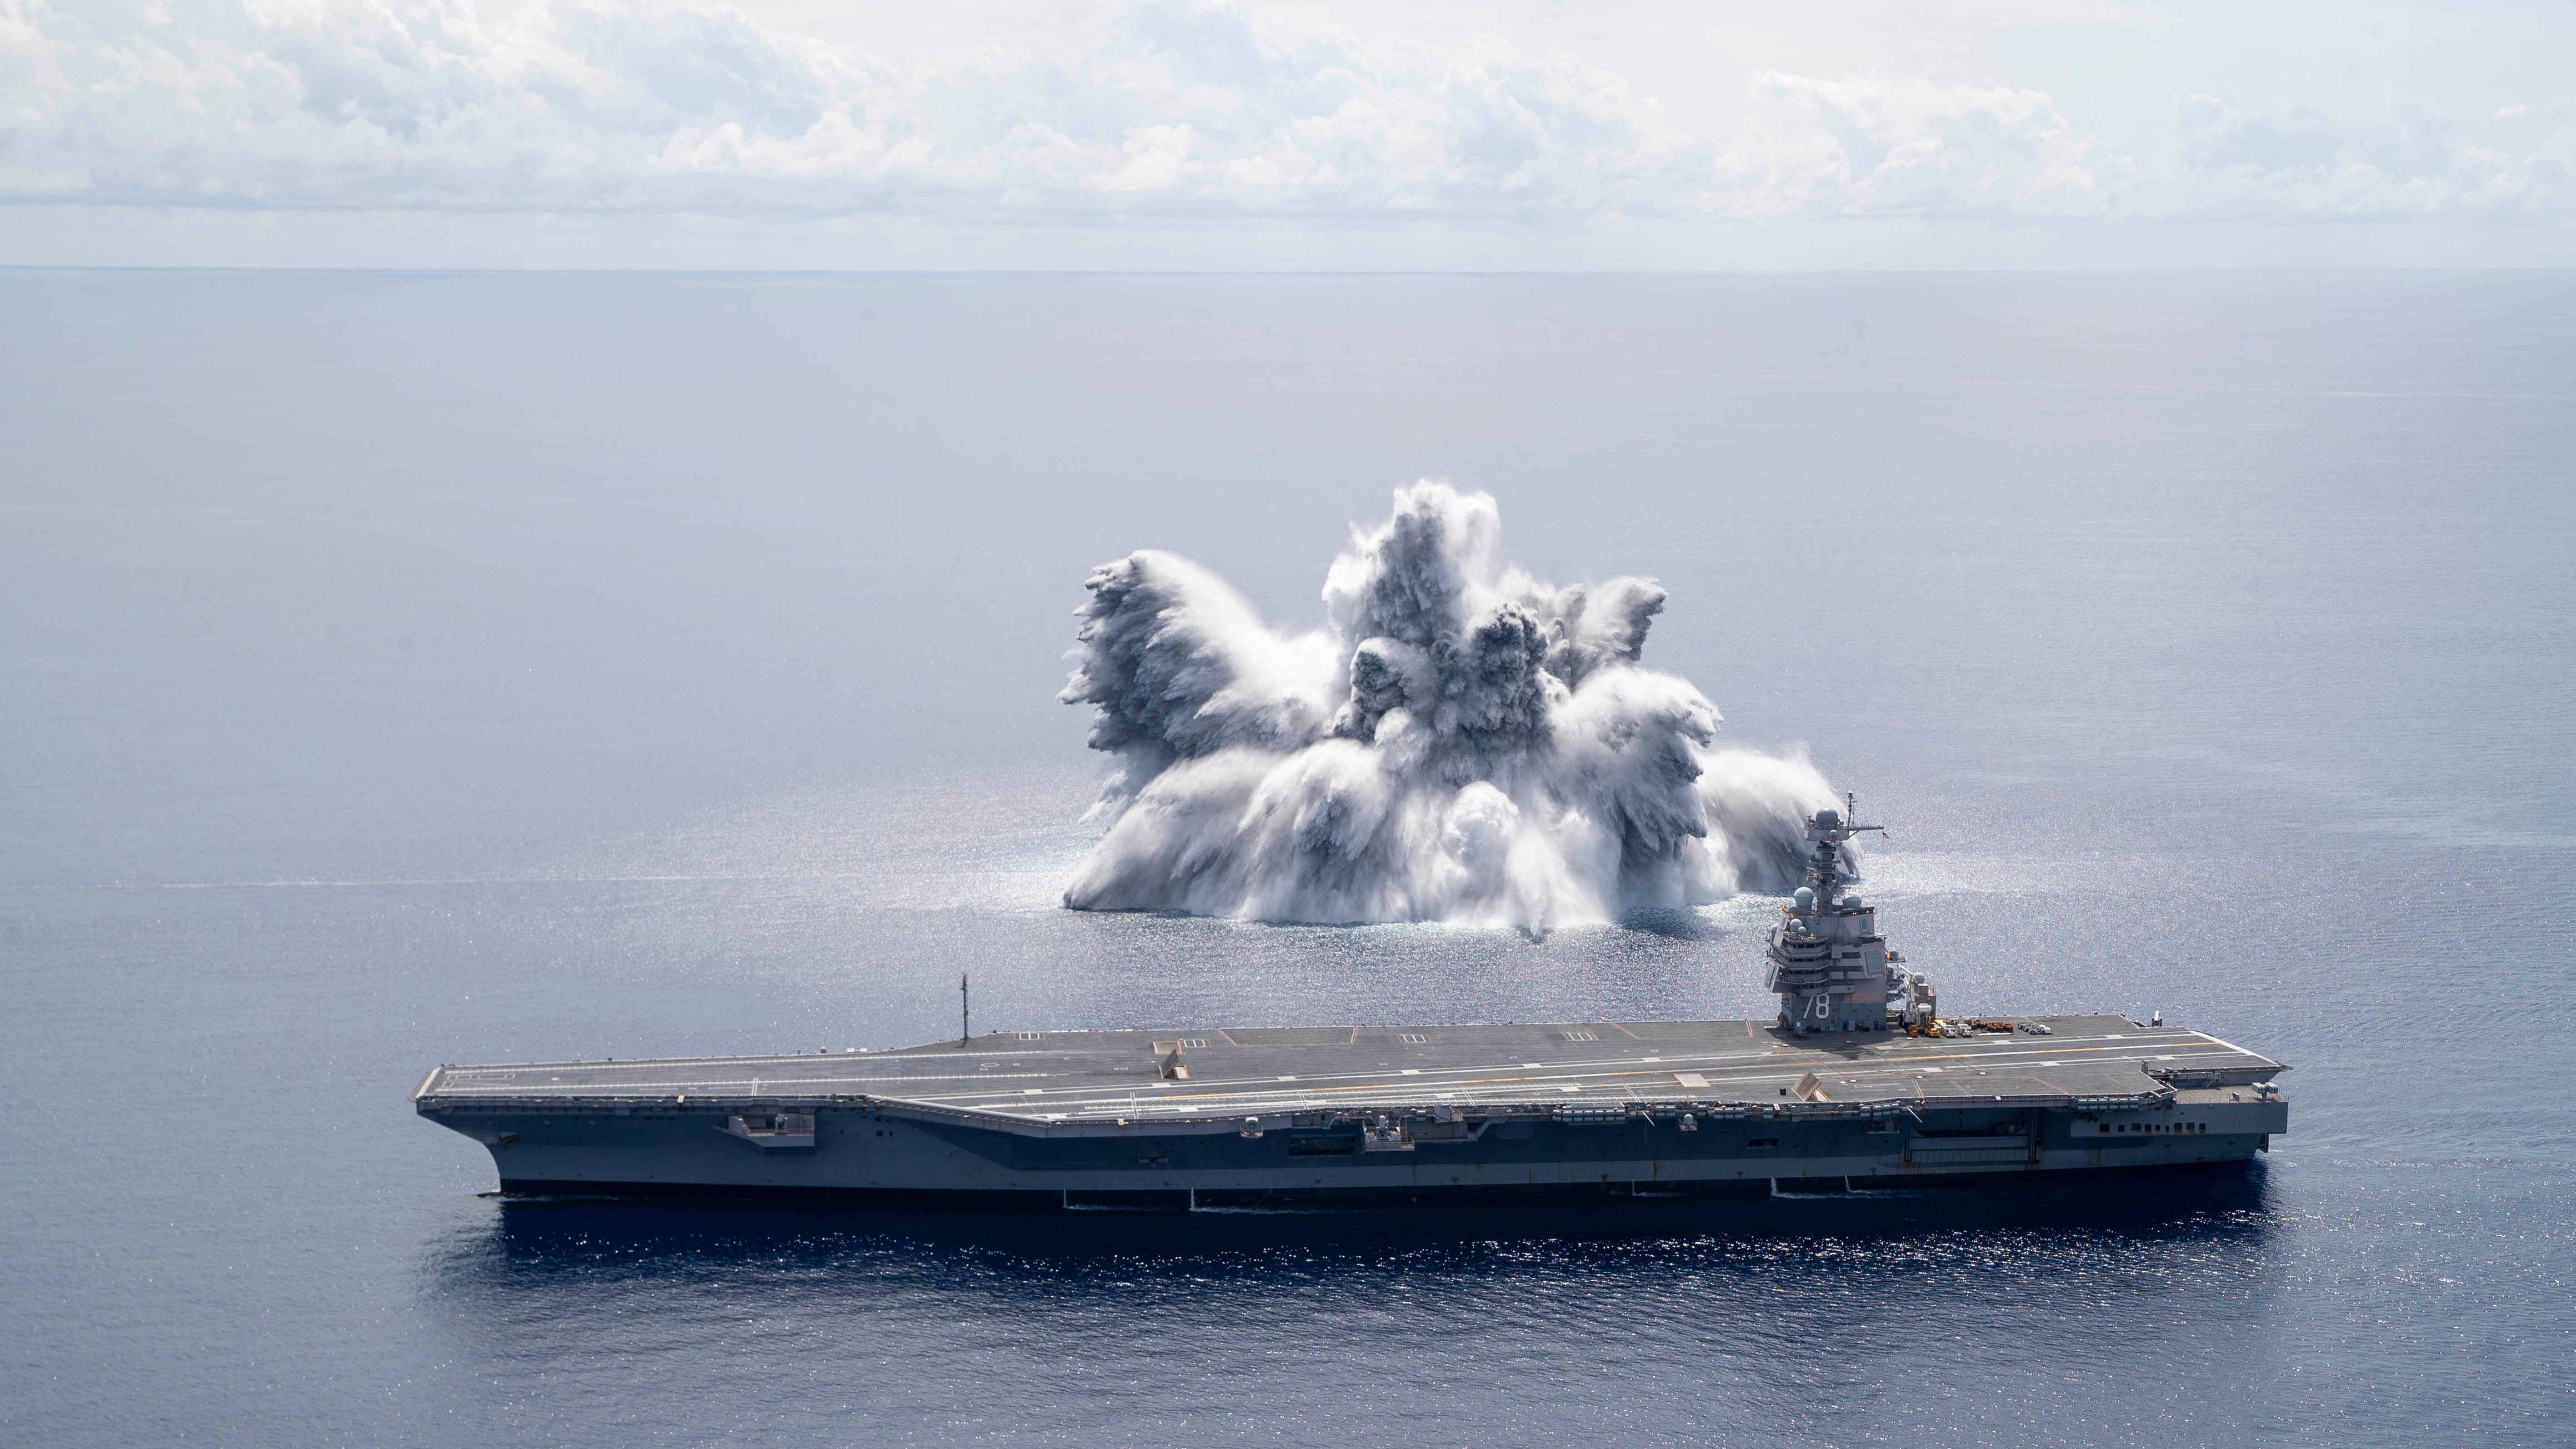 In this handout image courtesy of the US Navy the aircraft carrier USS Gerald R. Ford (CVN 78) completes the first scheduled explosive event of Full Ship Shock Trials on 18 June